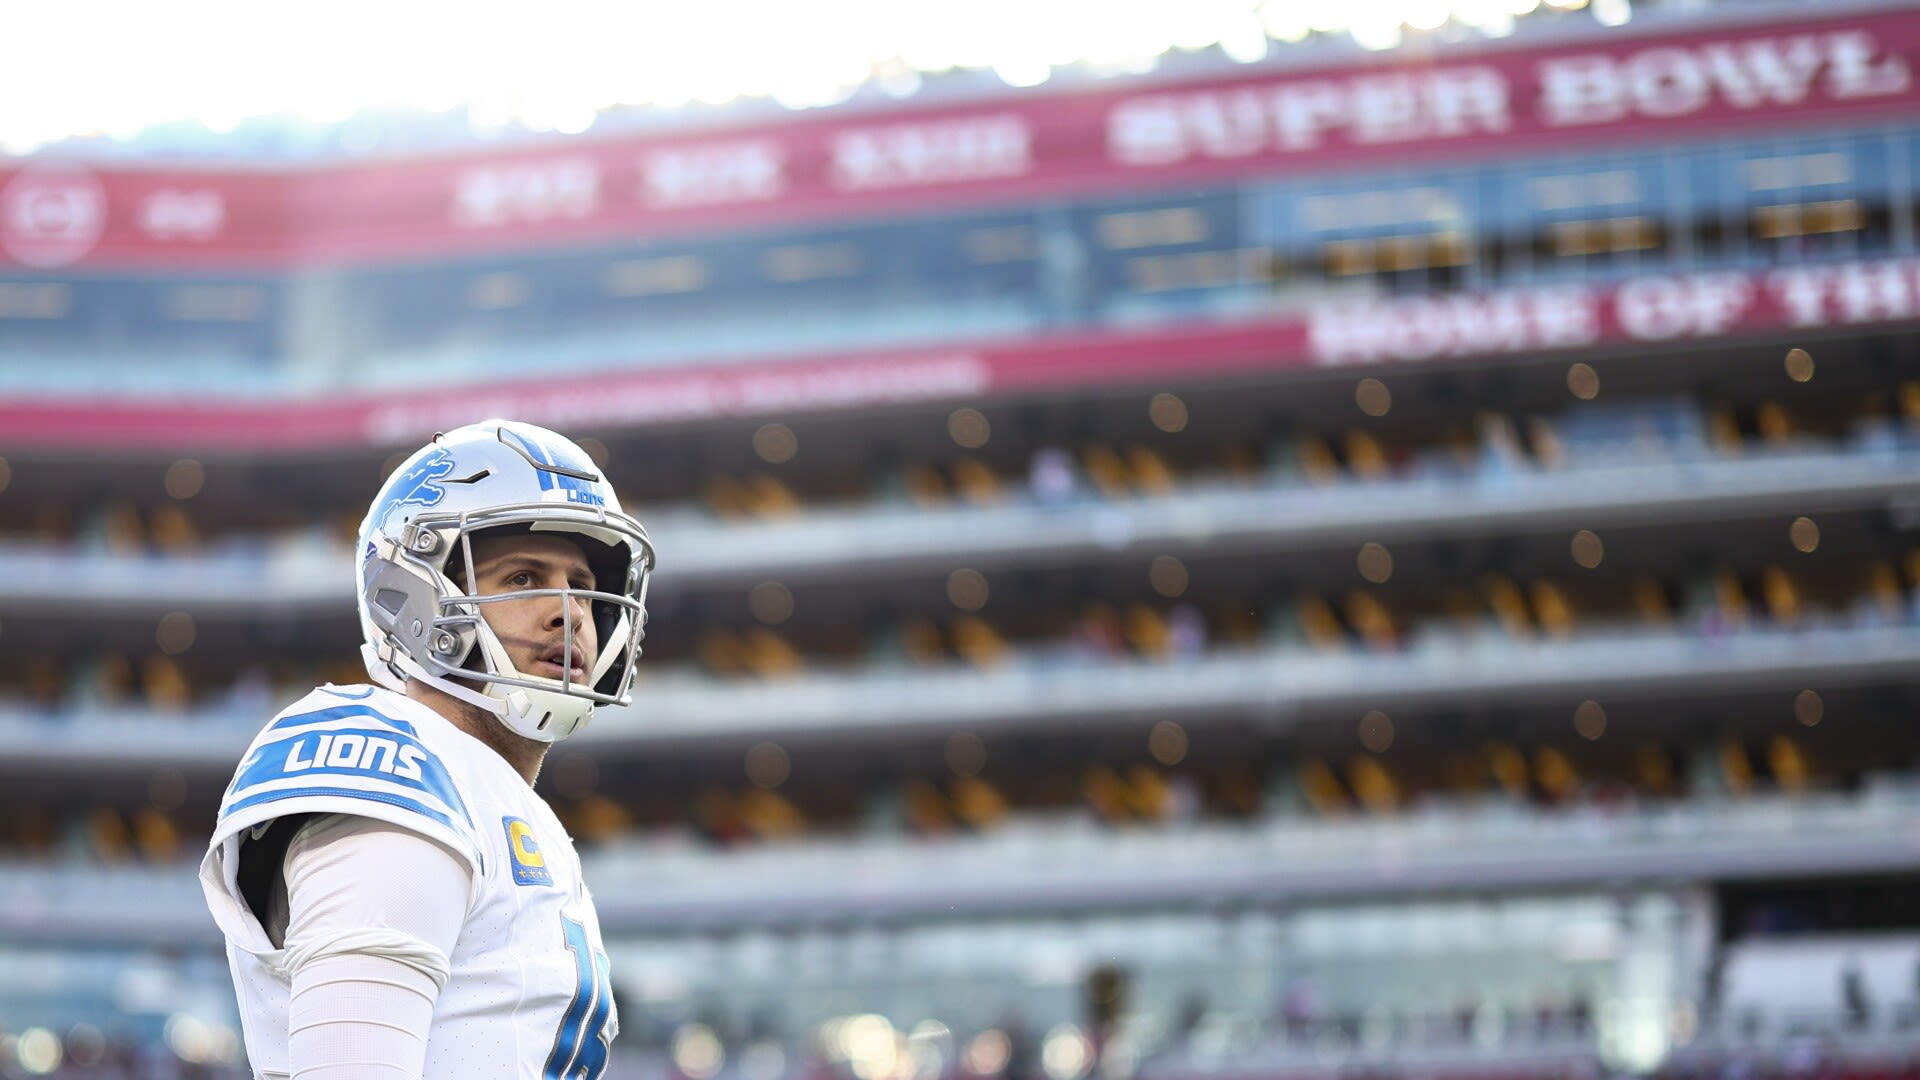 Lions announce Jared Goff extension